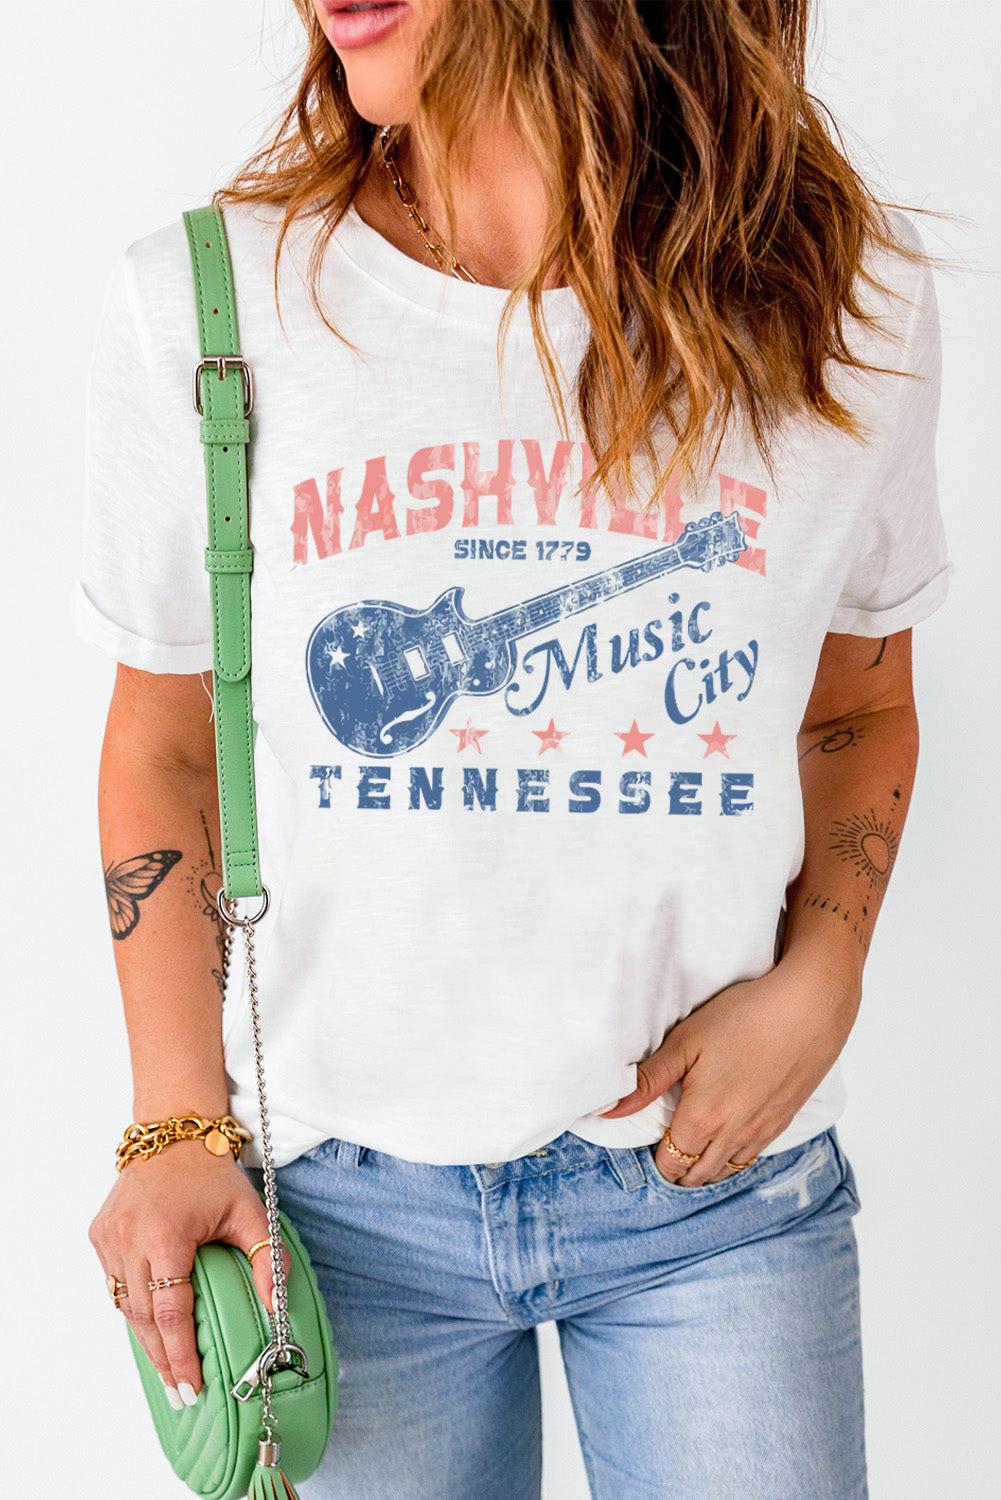 NASHVILLE TENNESSEE Guitar Graphic Tee Shirt BLUE ZONE PLANET